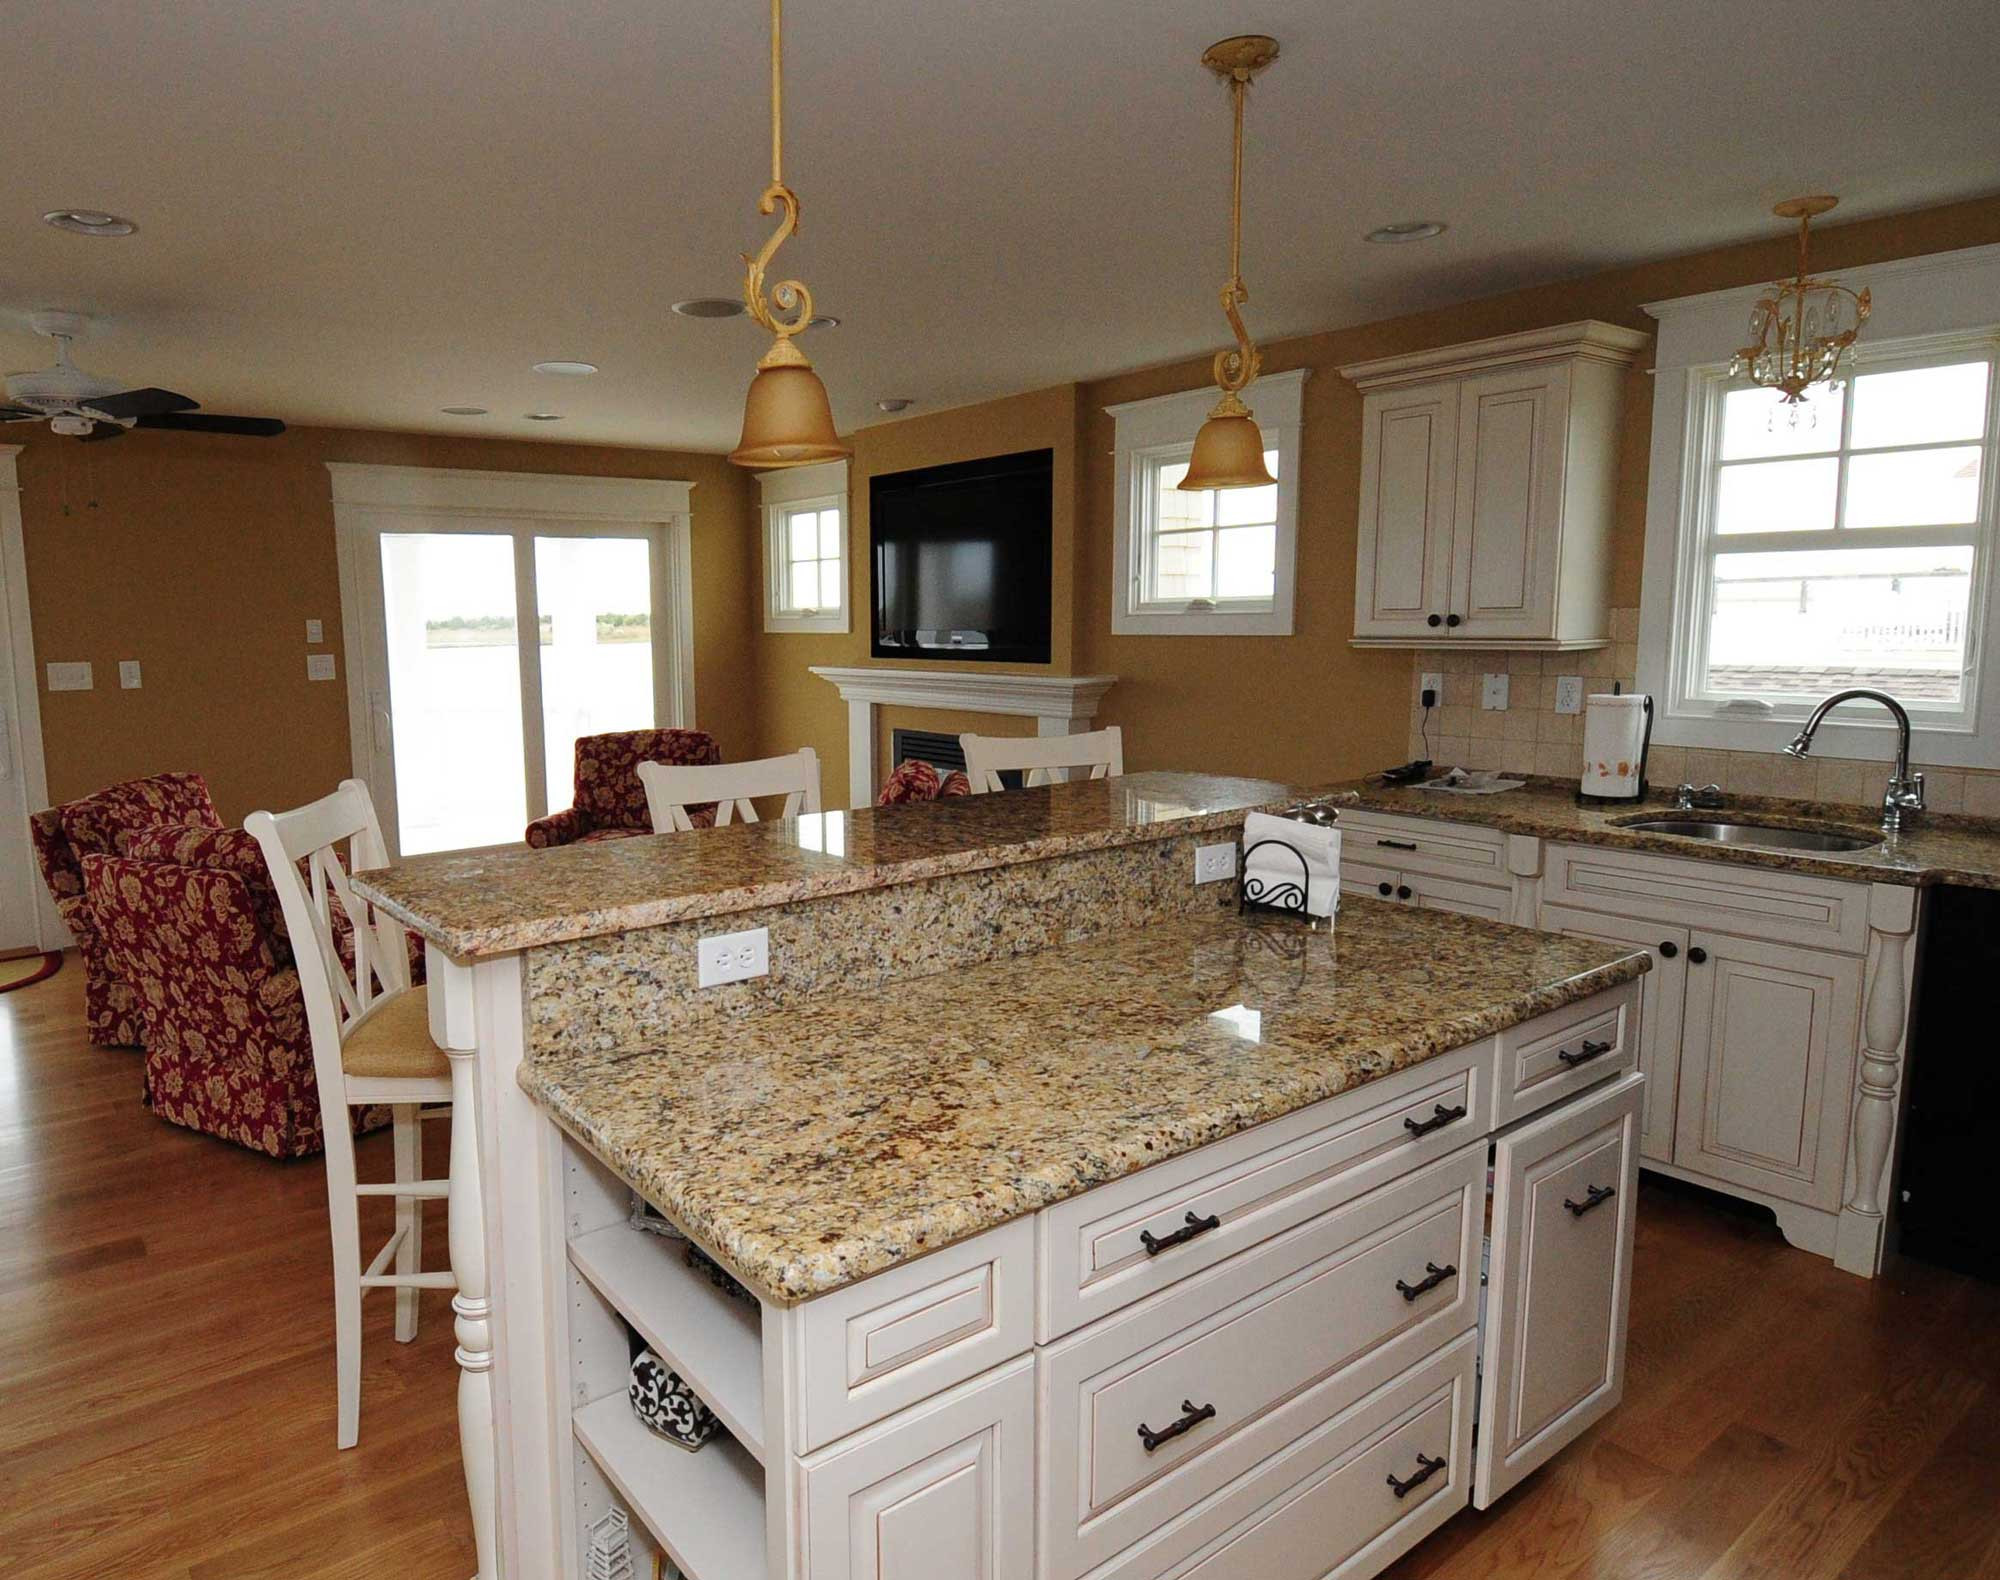 Kitchen Cabinet With Counter
 Granite Counter Tops for Beautiful Kitchen Island in